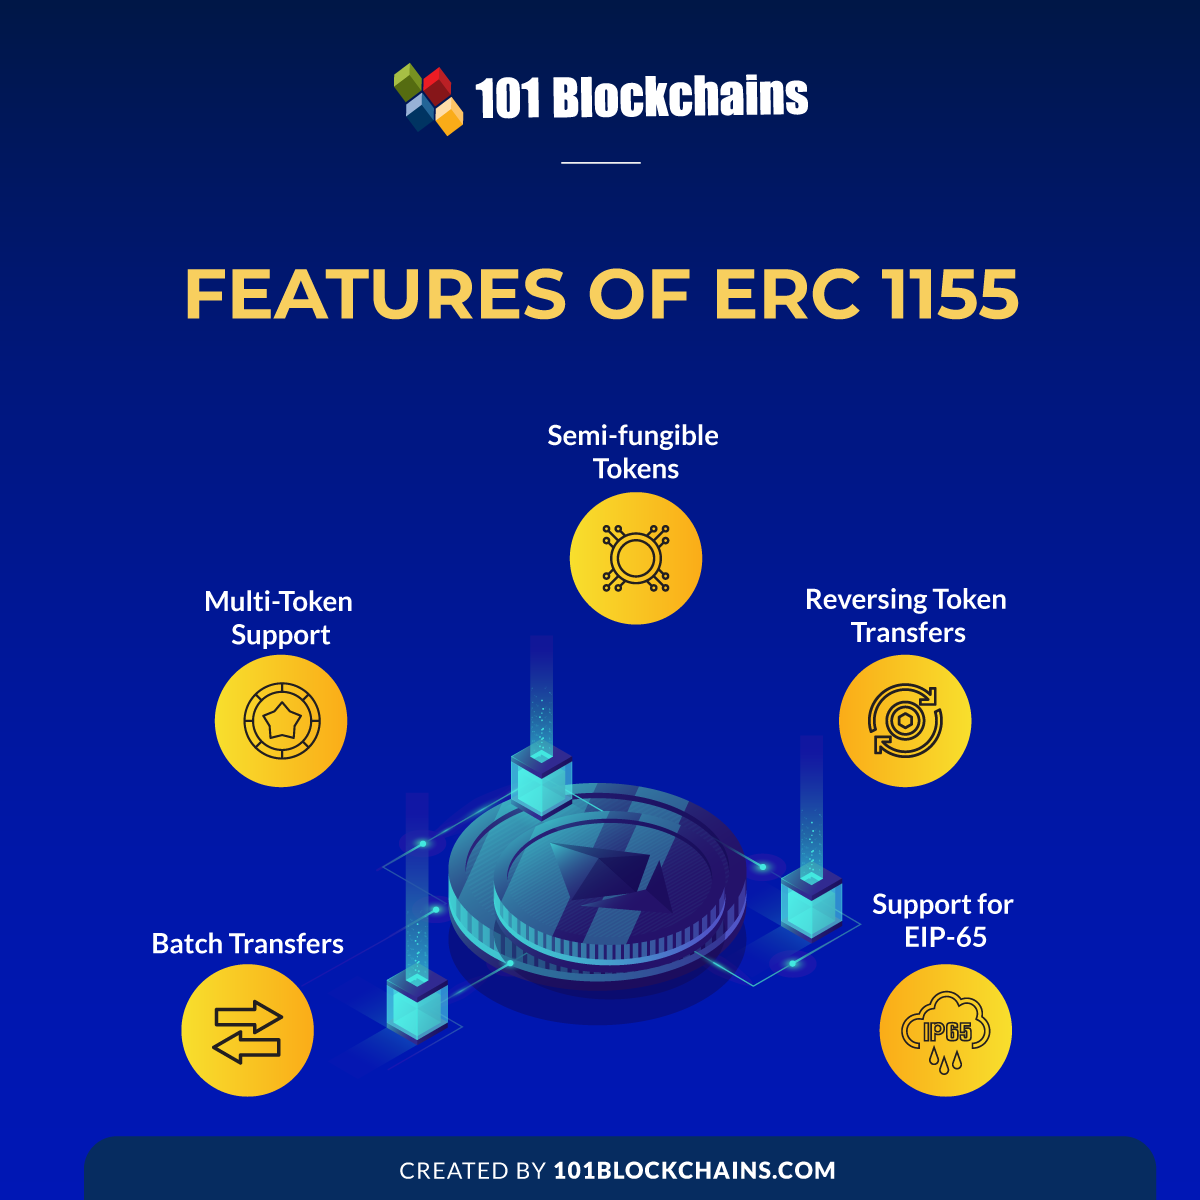 Features of erc 1155